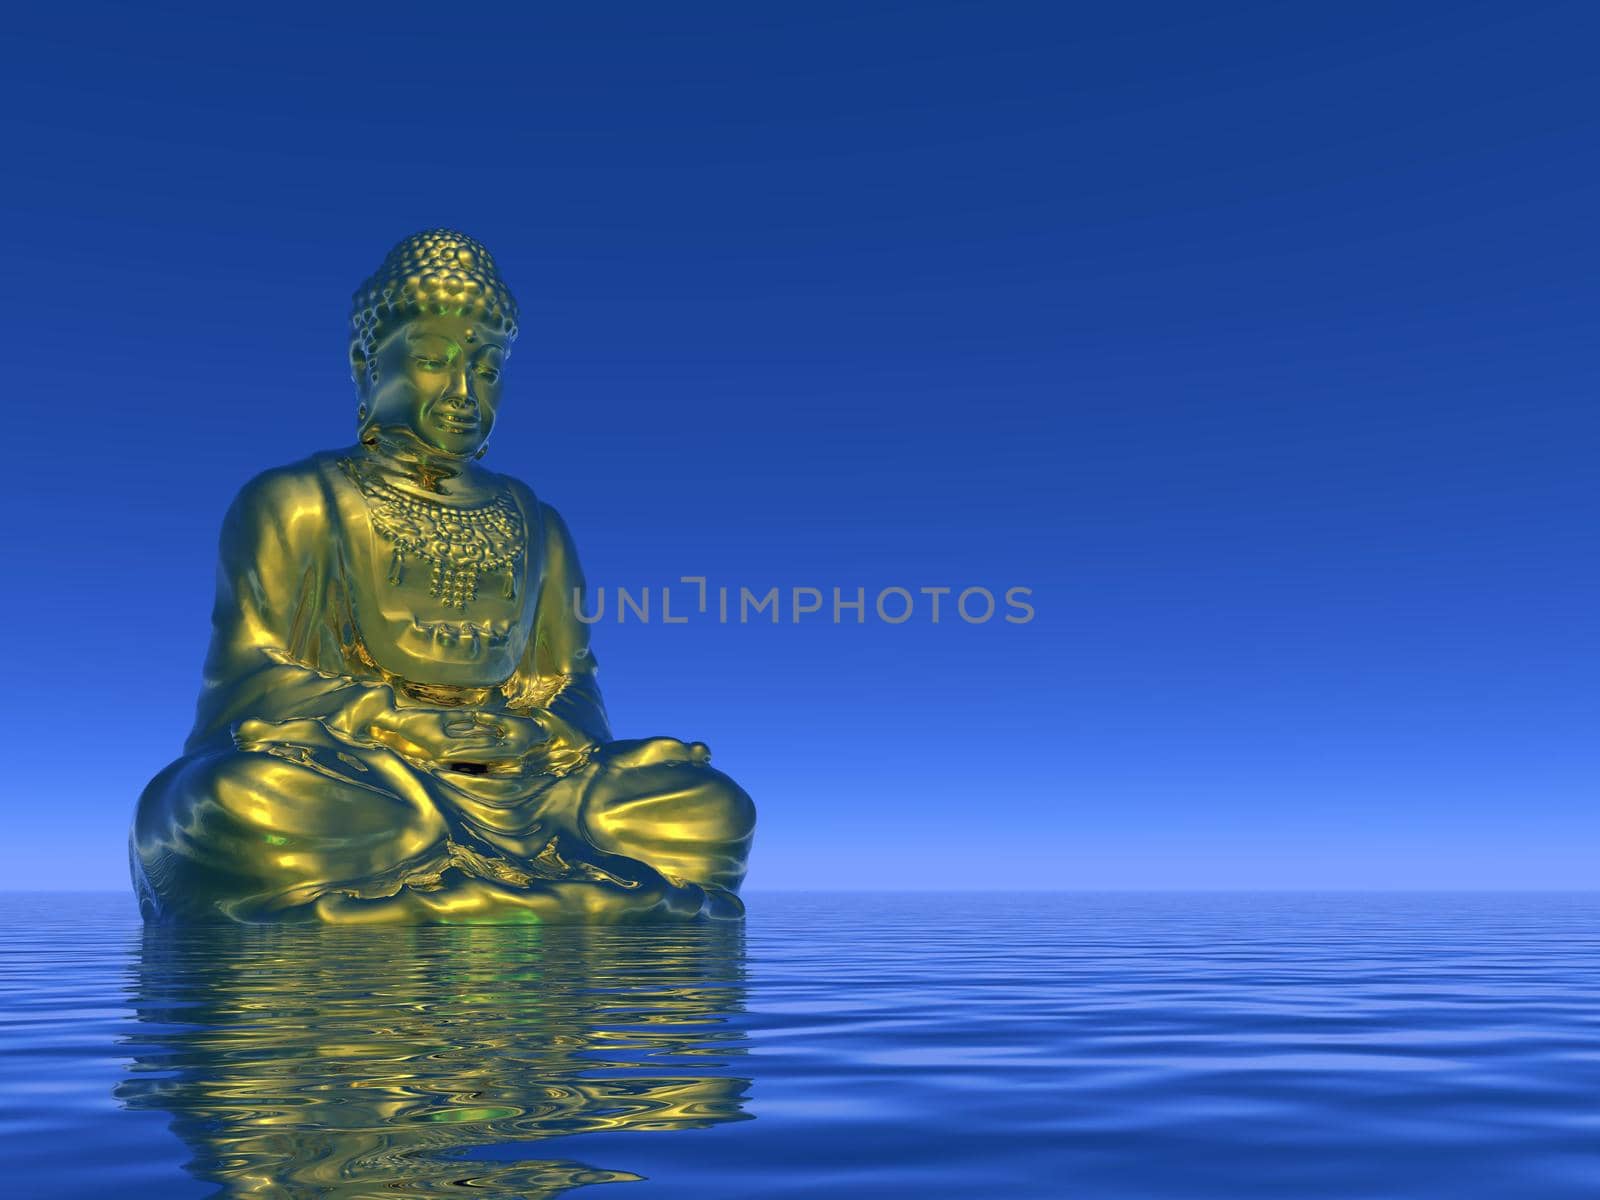 One golden buddha meditating on water by blue night